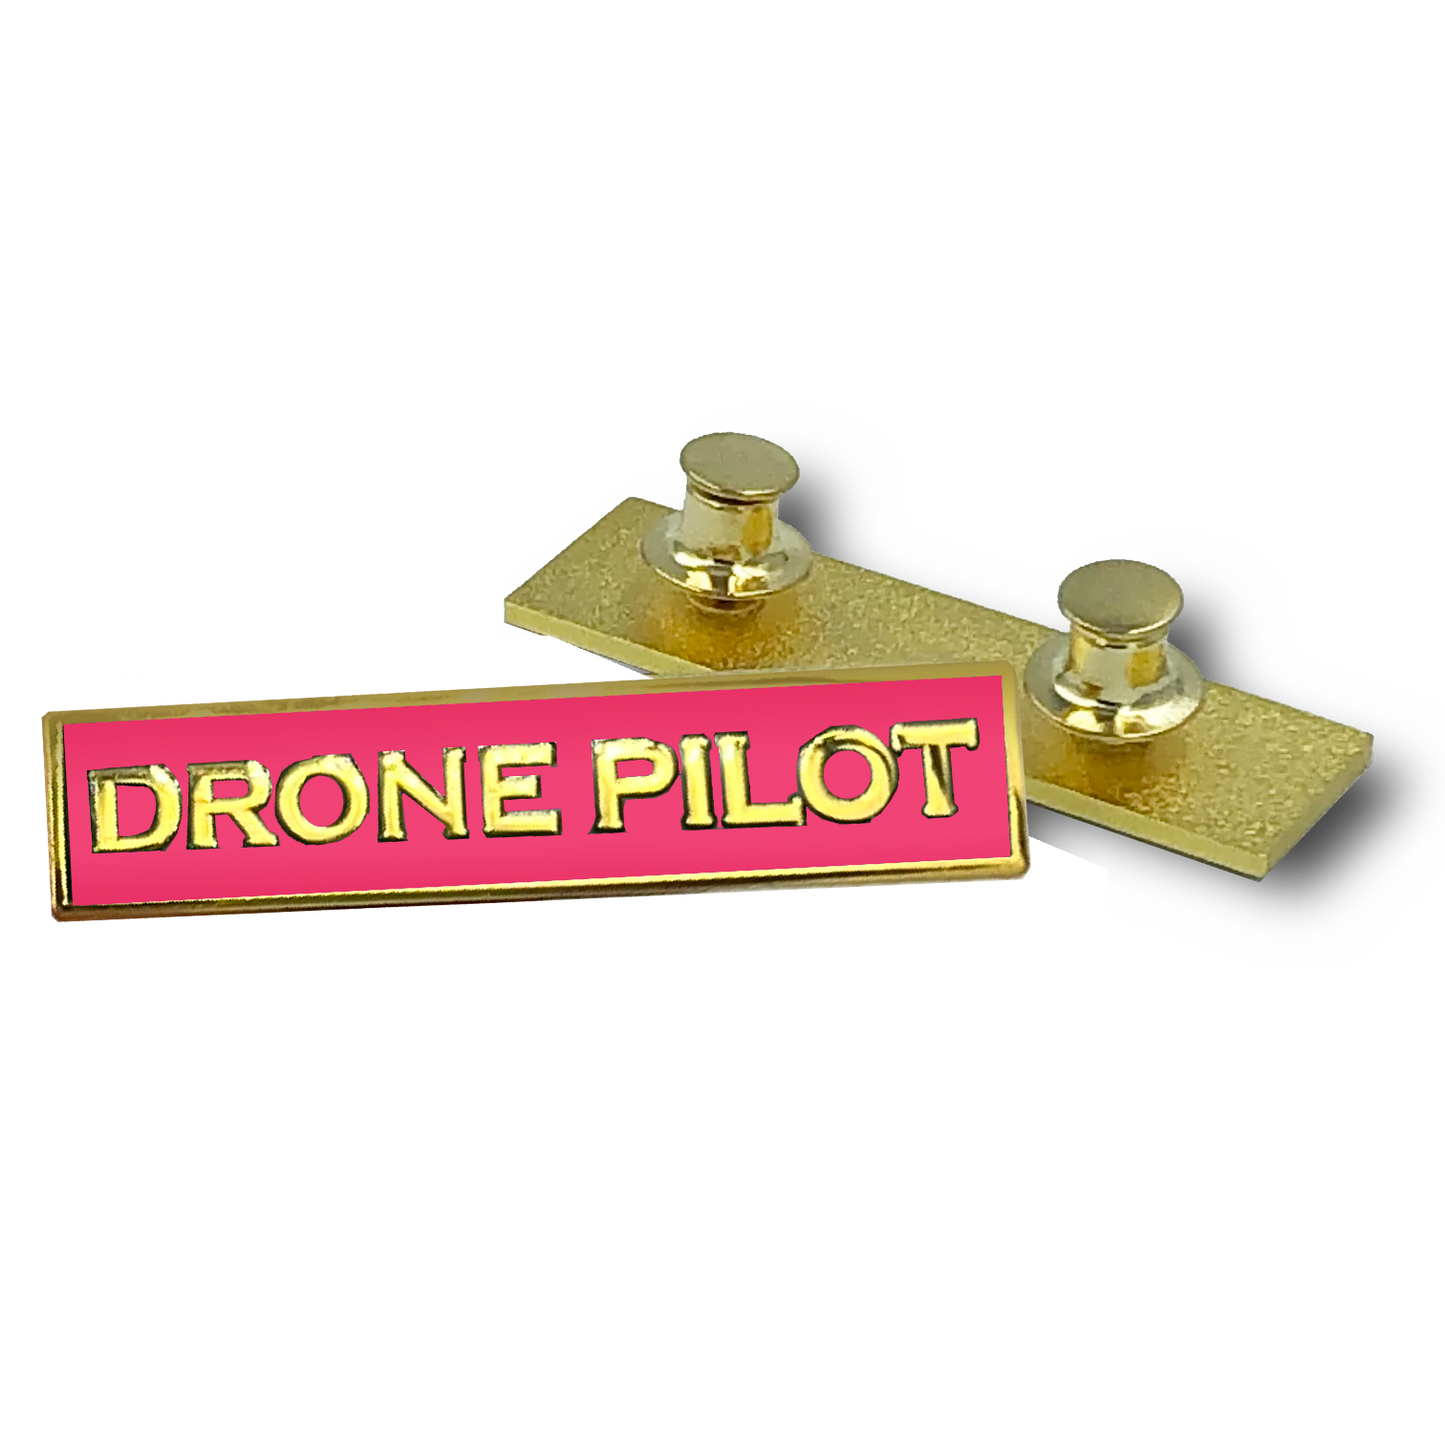 PBX-012-E Ladies DRONE PILOT Pink Commendation Bar Pin Police Government Realtor Commercial FAA